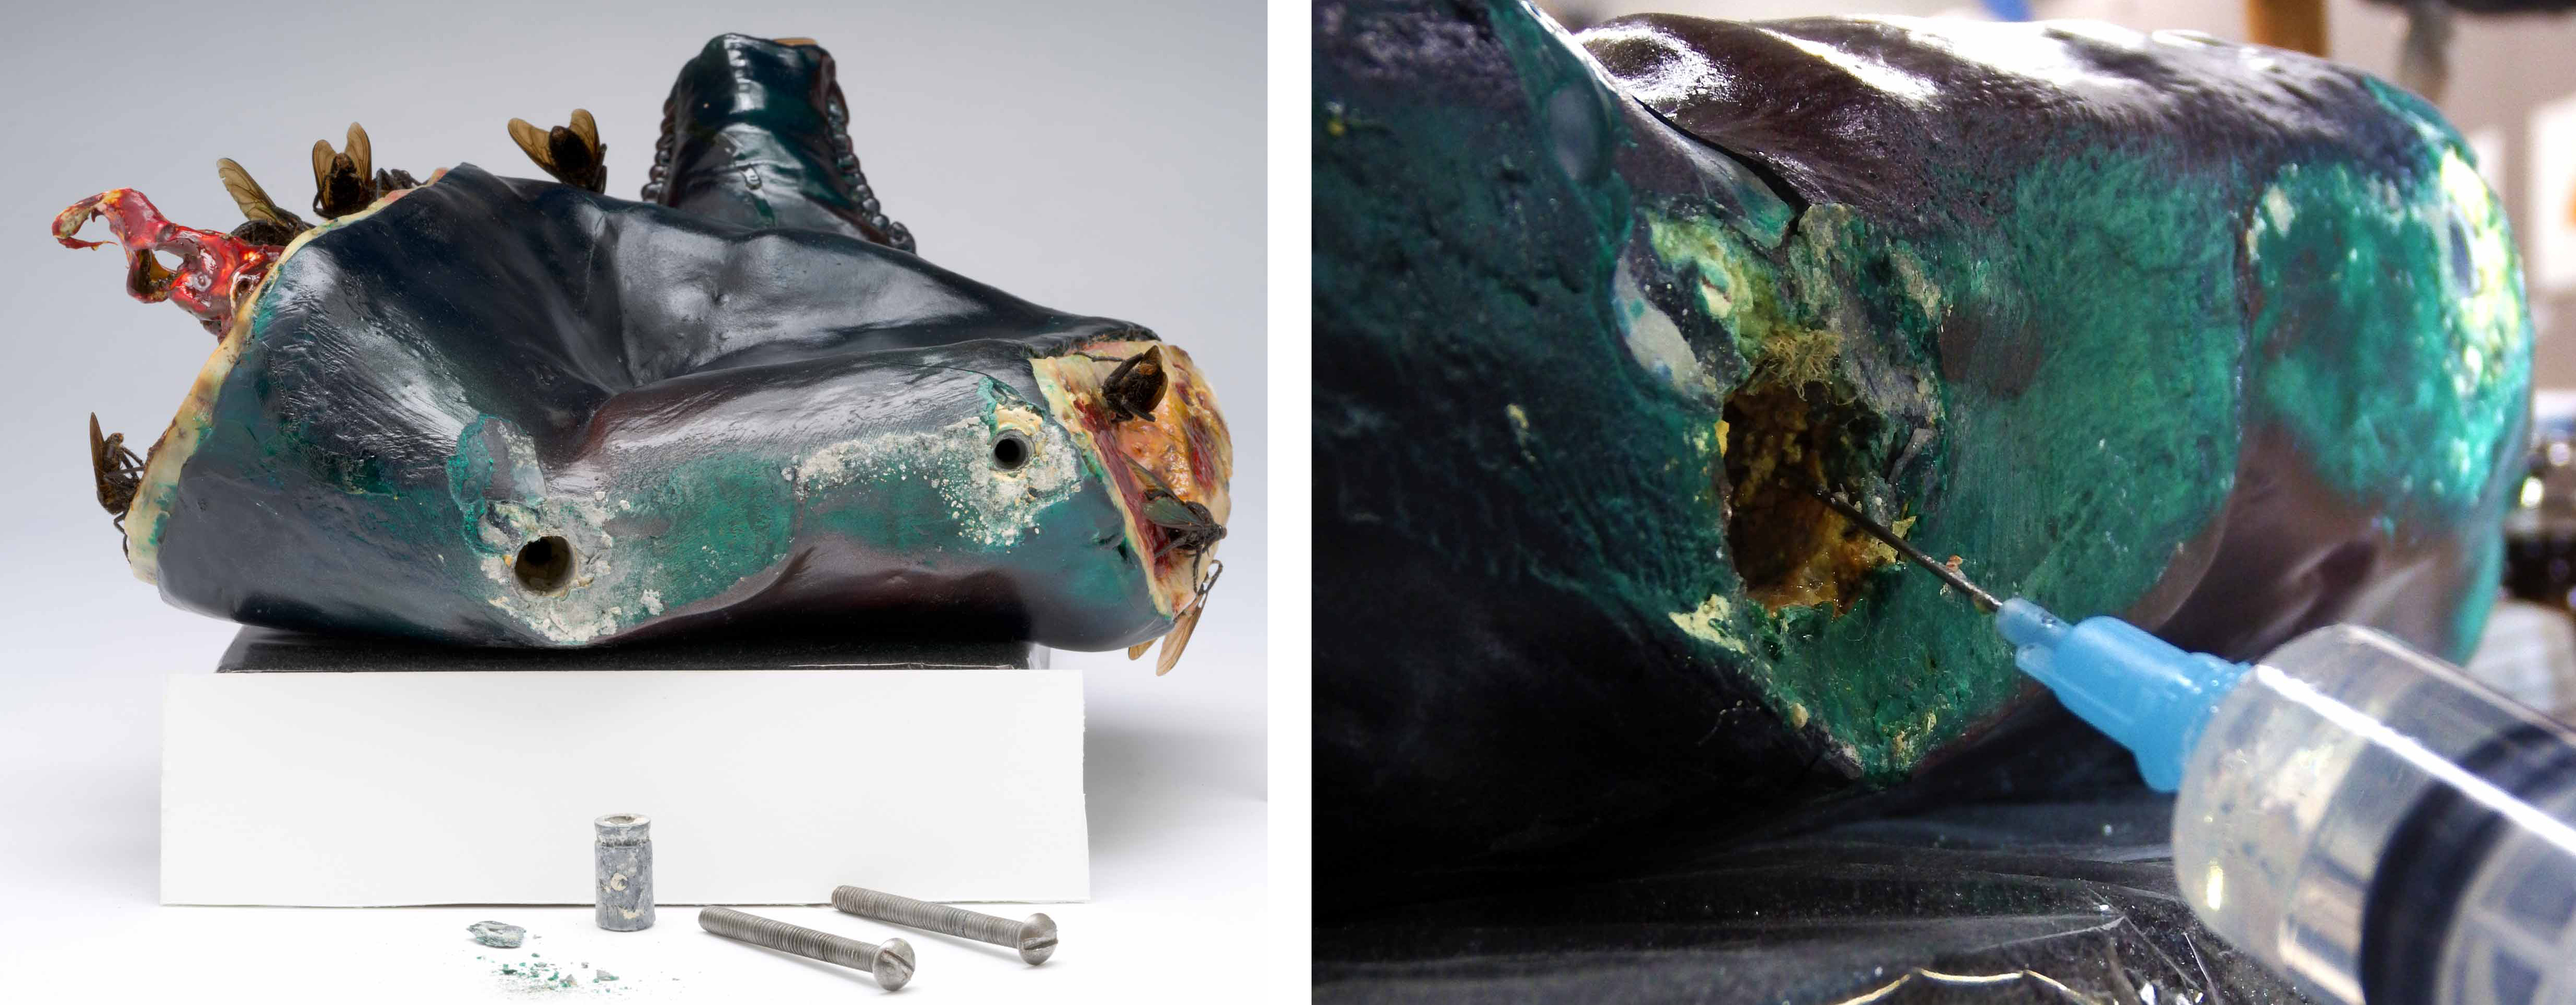 Left: Lead anchor removed. Right: Injecting Acrylic adhesive to stabilize the plaster core. Paul Thek, Untitled (Meat Piece with Flies) (details), 1965, Los Angeles County Museum of Art, The Judith Rothschild Foundation, photo © Museum Associates/LACMA Conservation, by Yosi Pozeilov